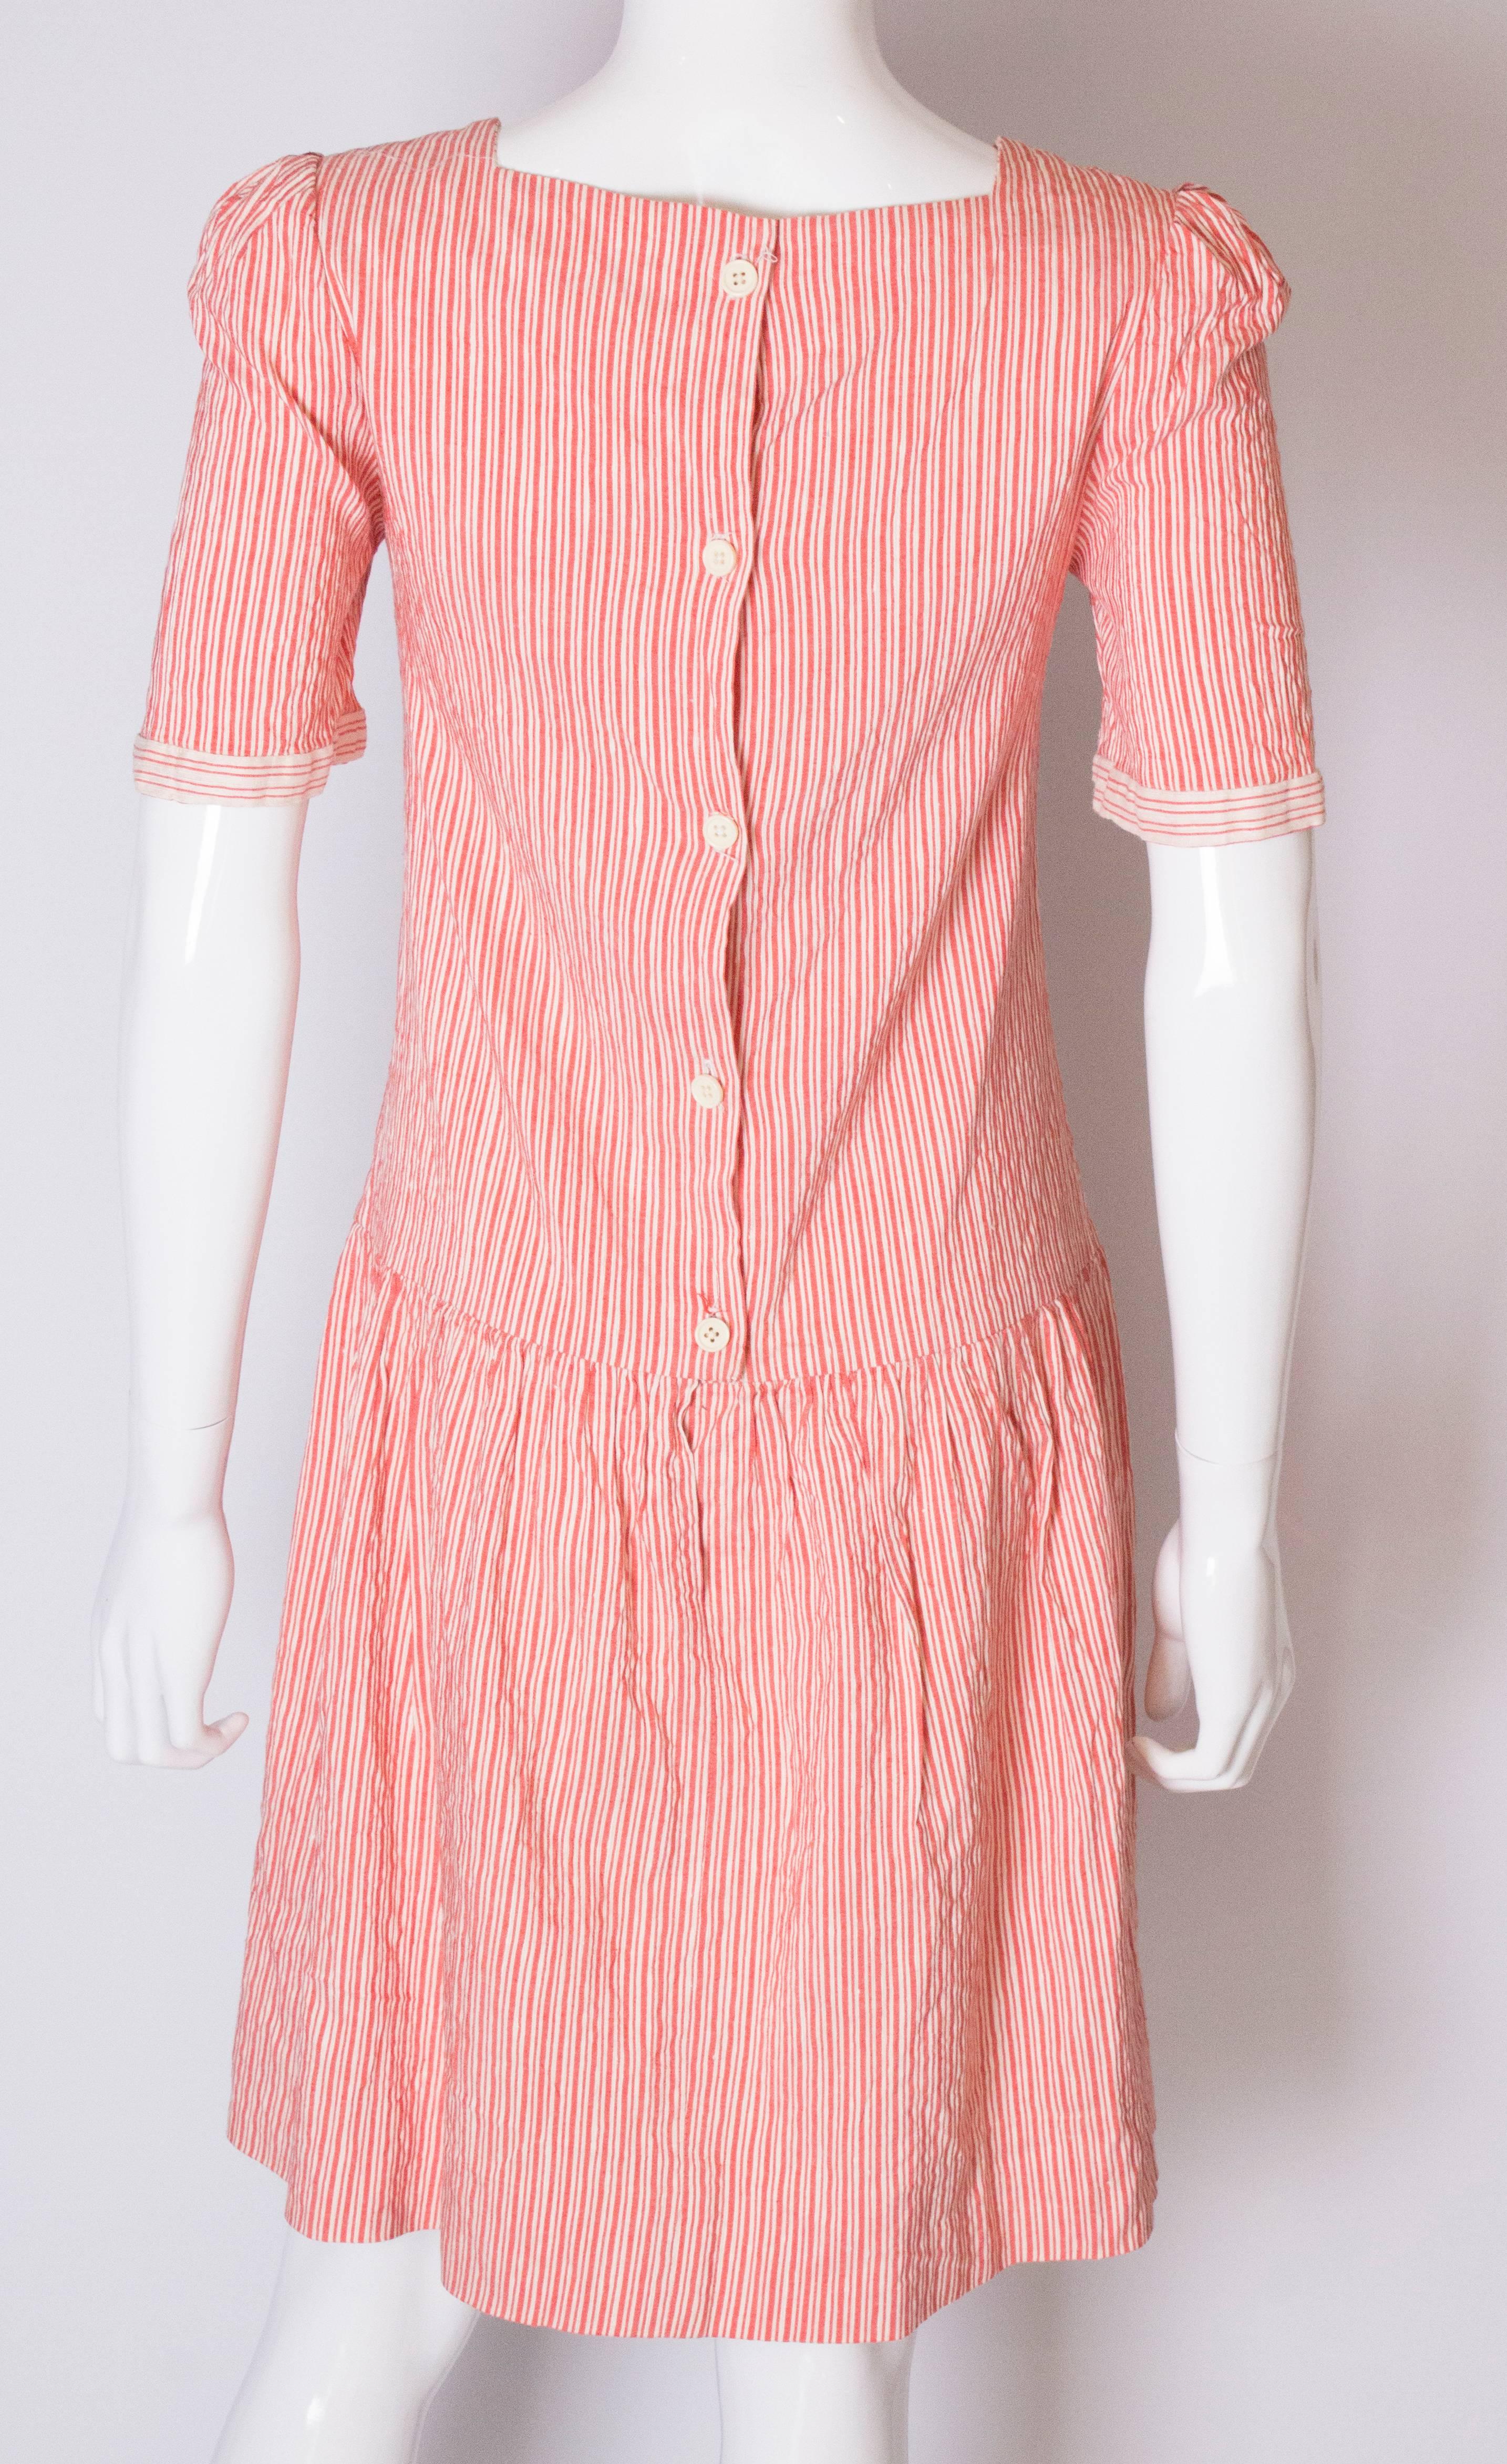 A Vintage 1990s stripe cotton summer day dress by Gina Fratini  For Sale 3